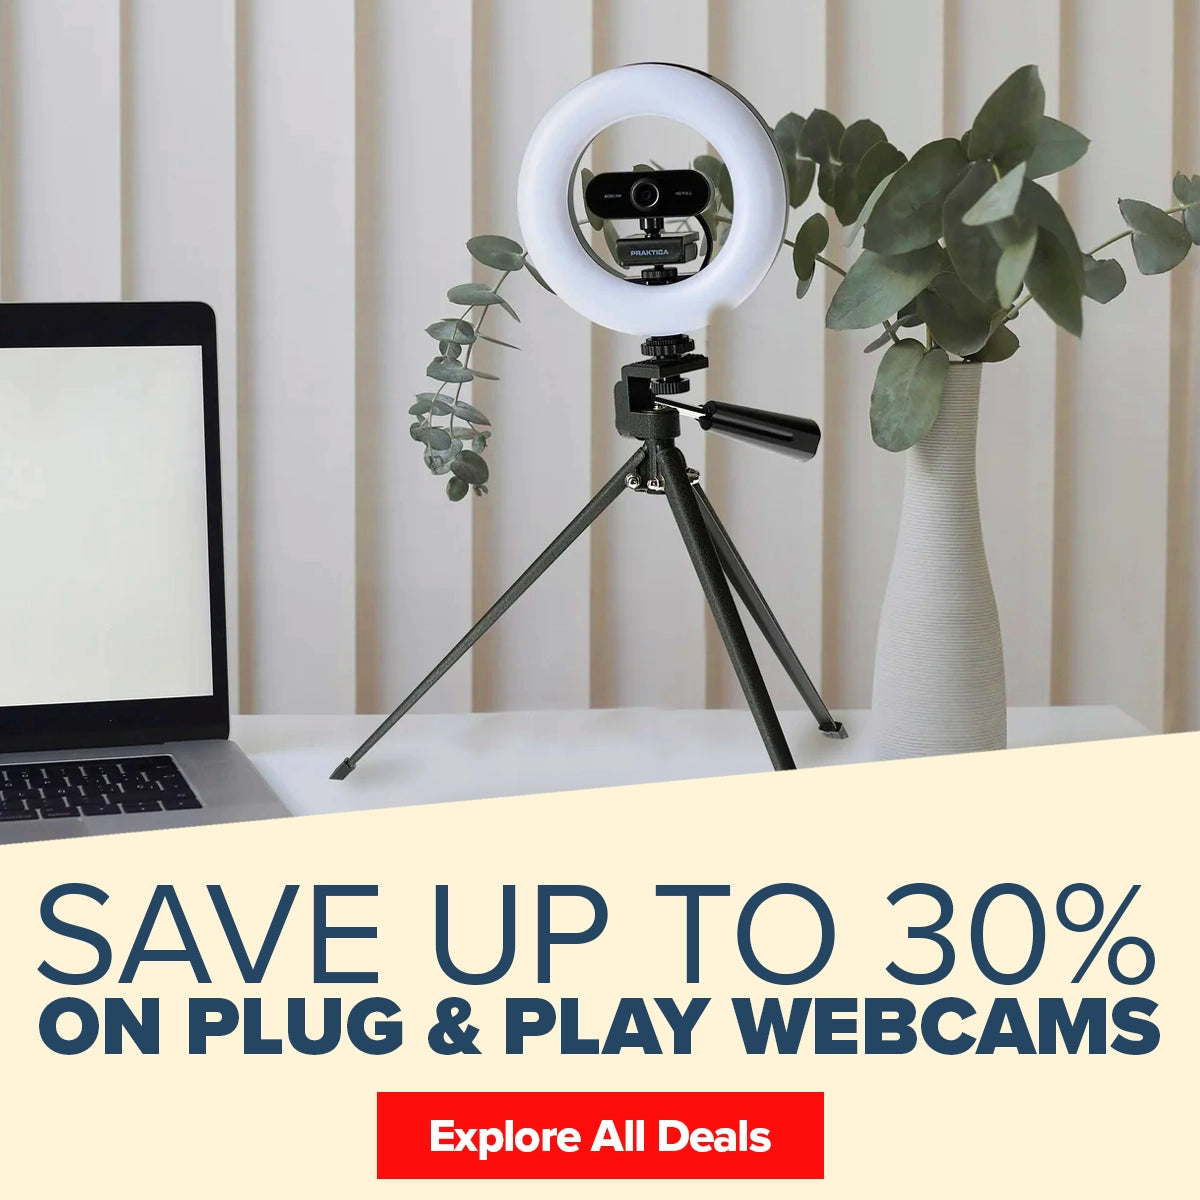 Save up to 30% on webcams